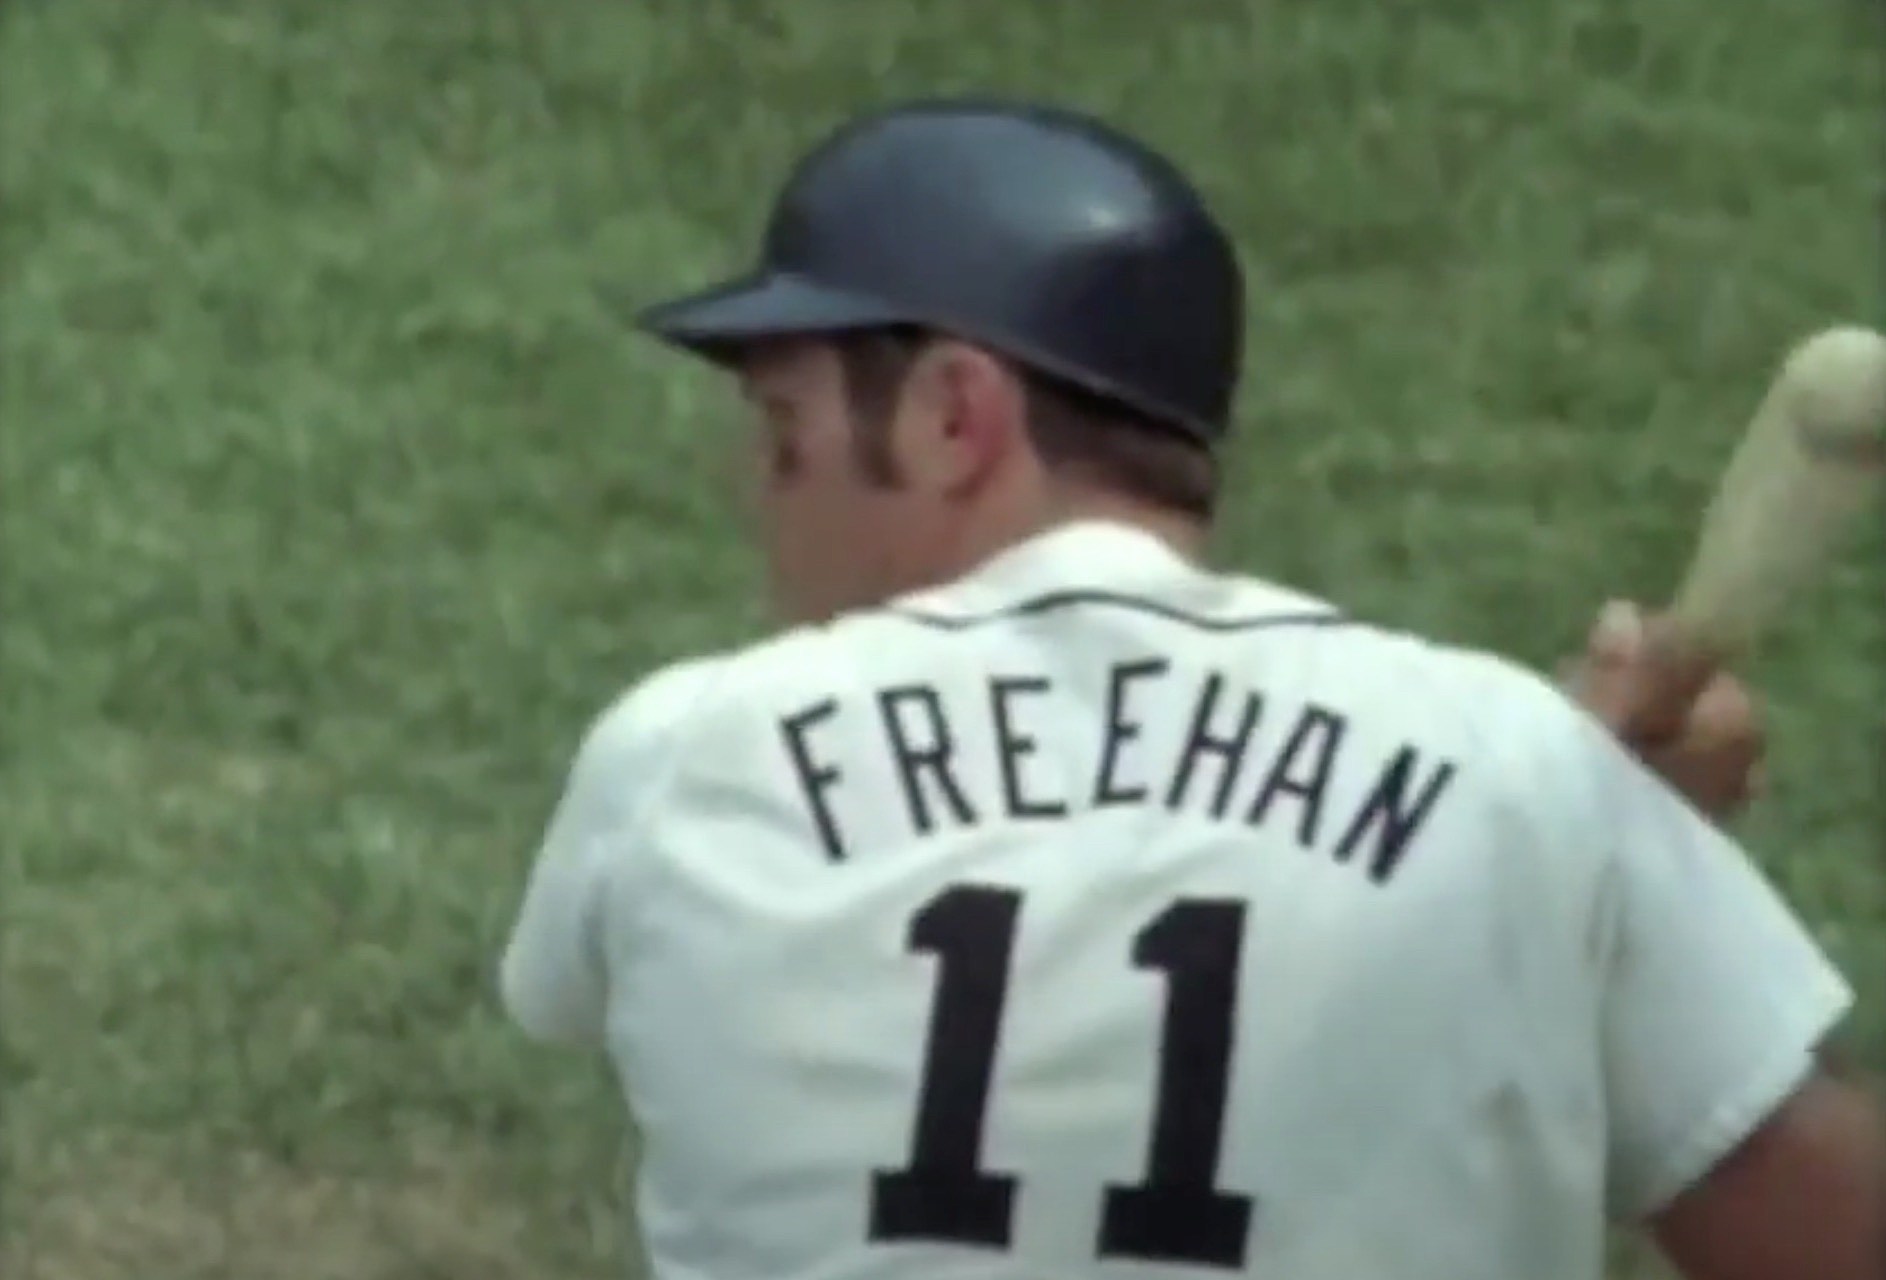 Detroit Tigers: Bill Freehan should be in the Hall of Fame